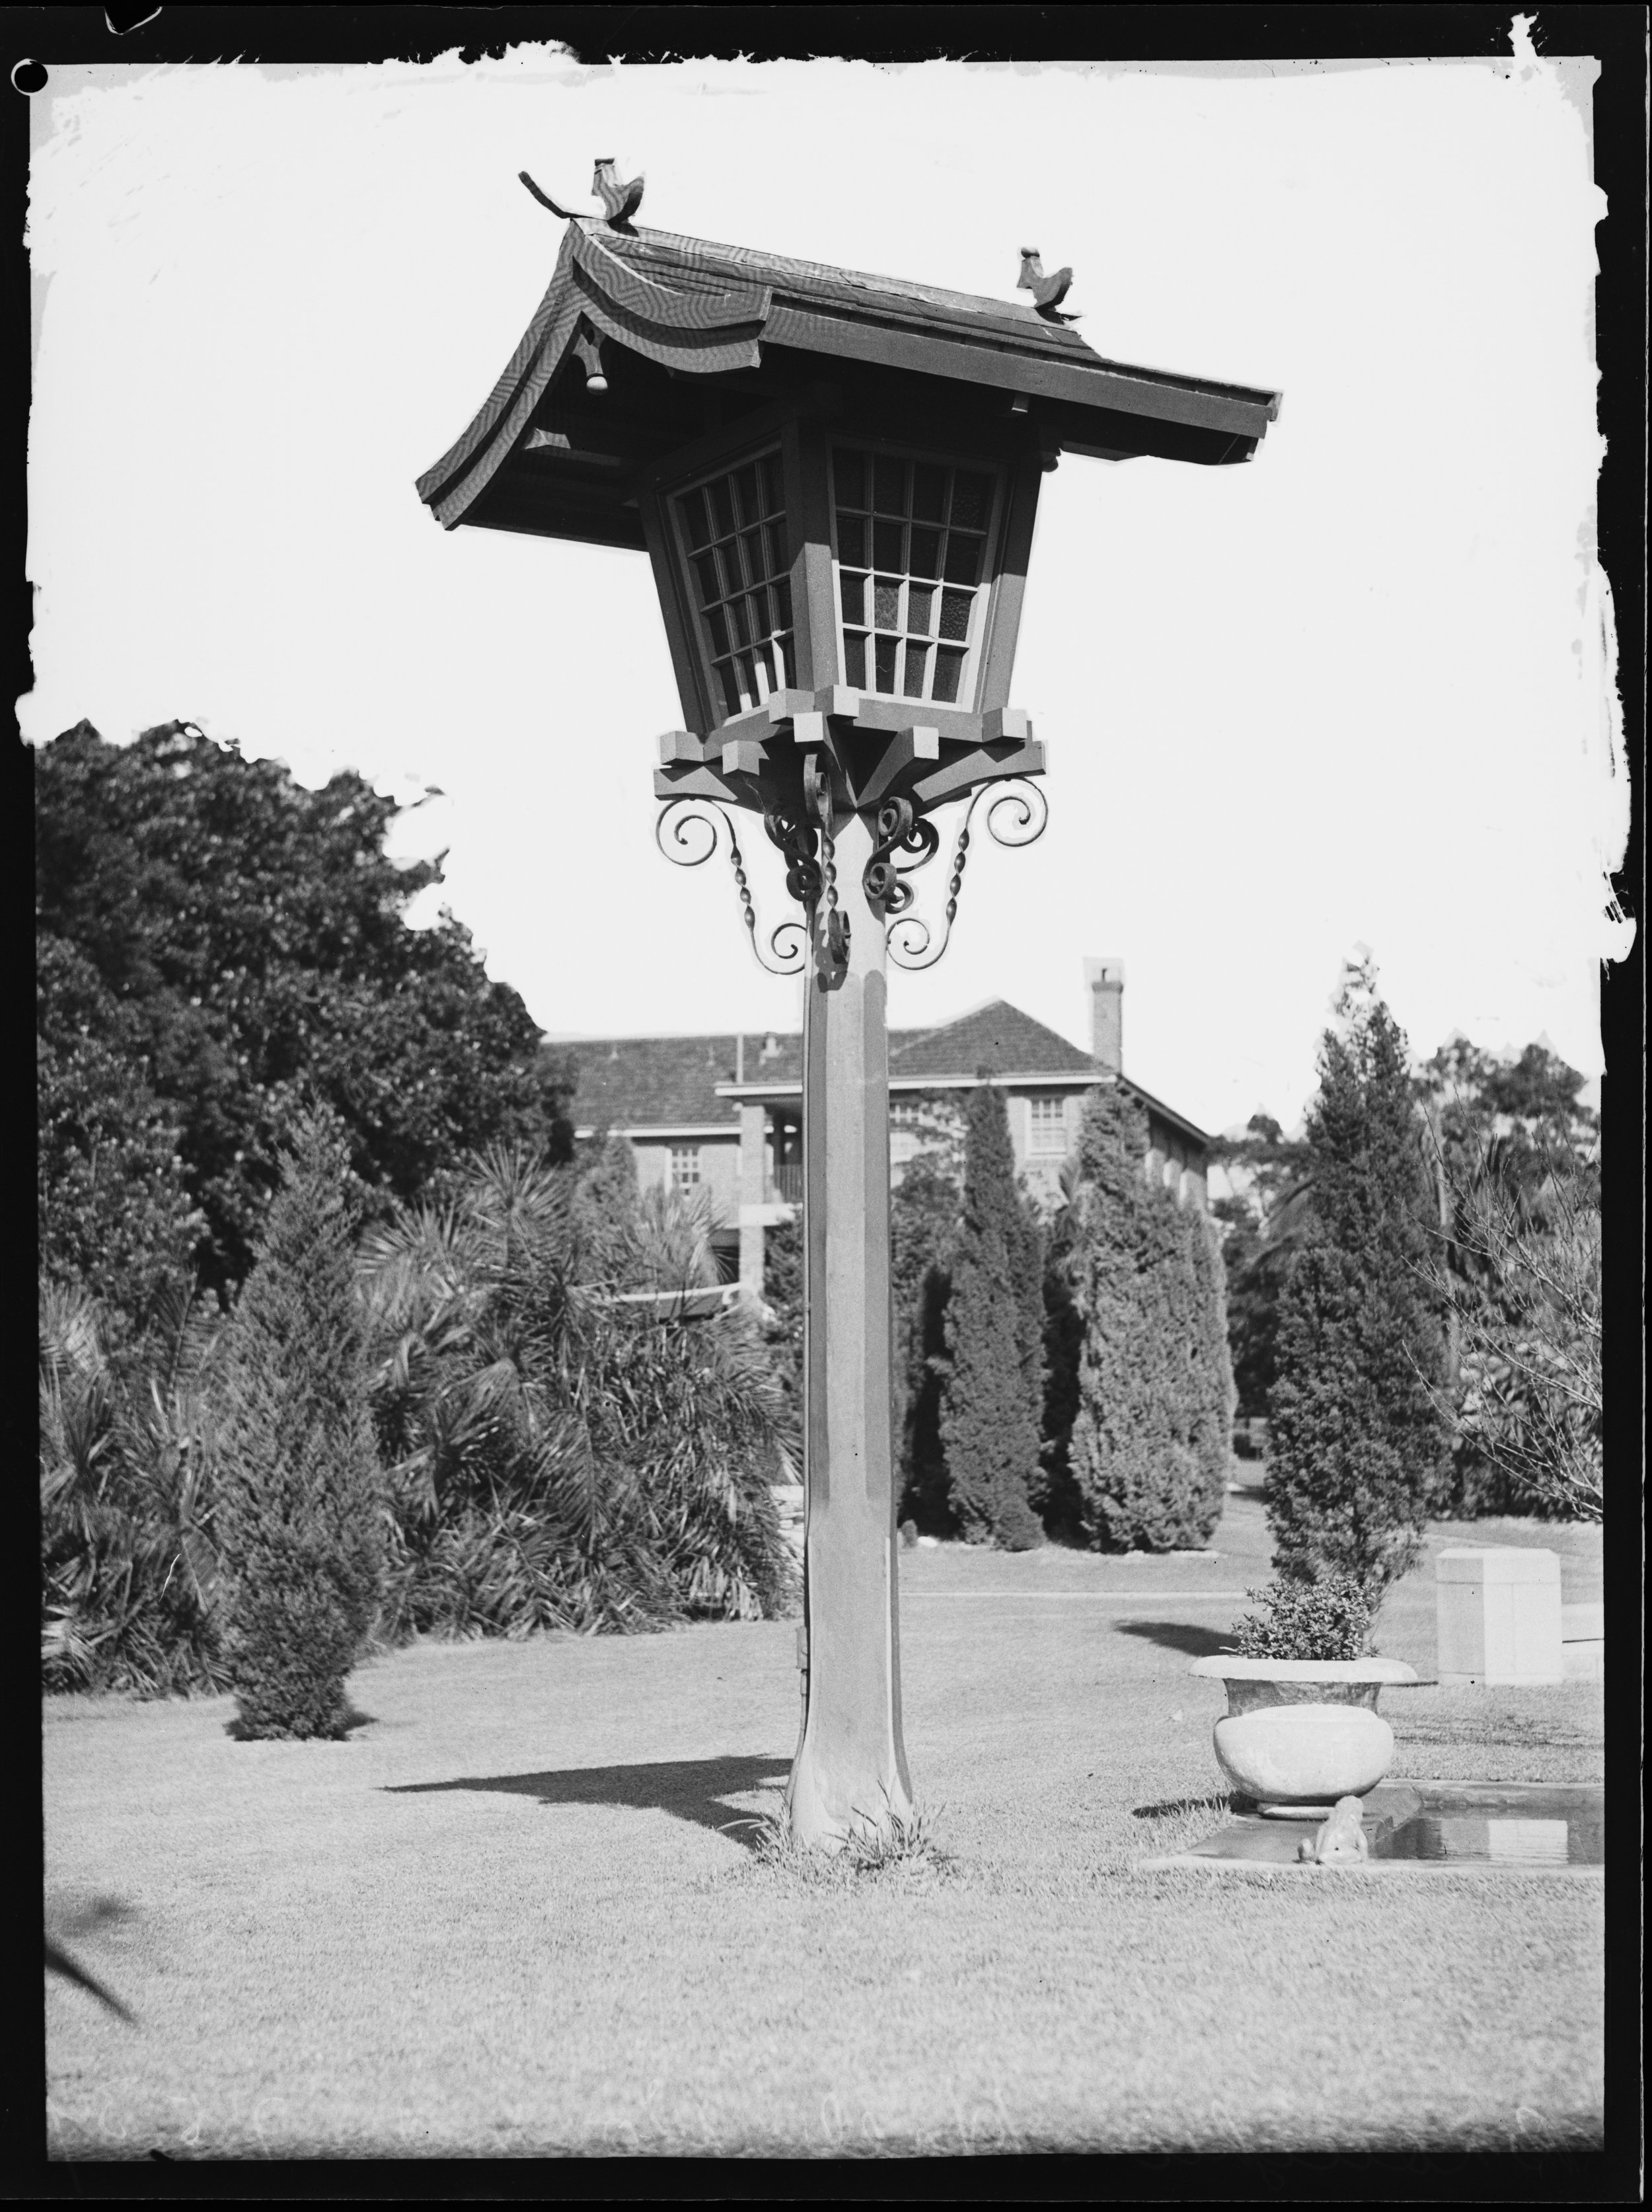 Decorate lamp post or bird feeder at Broughton Hall